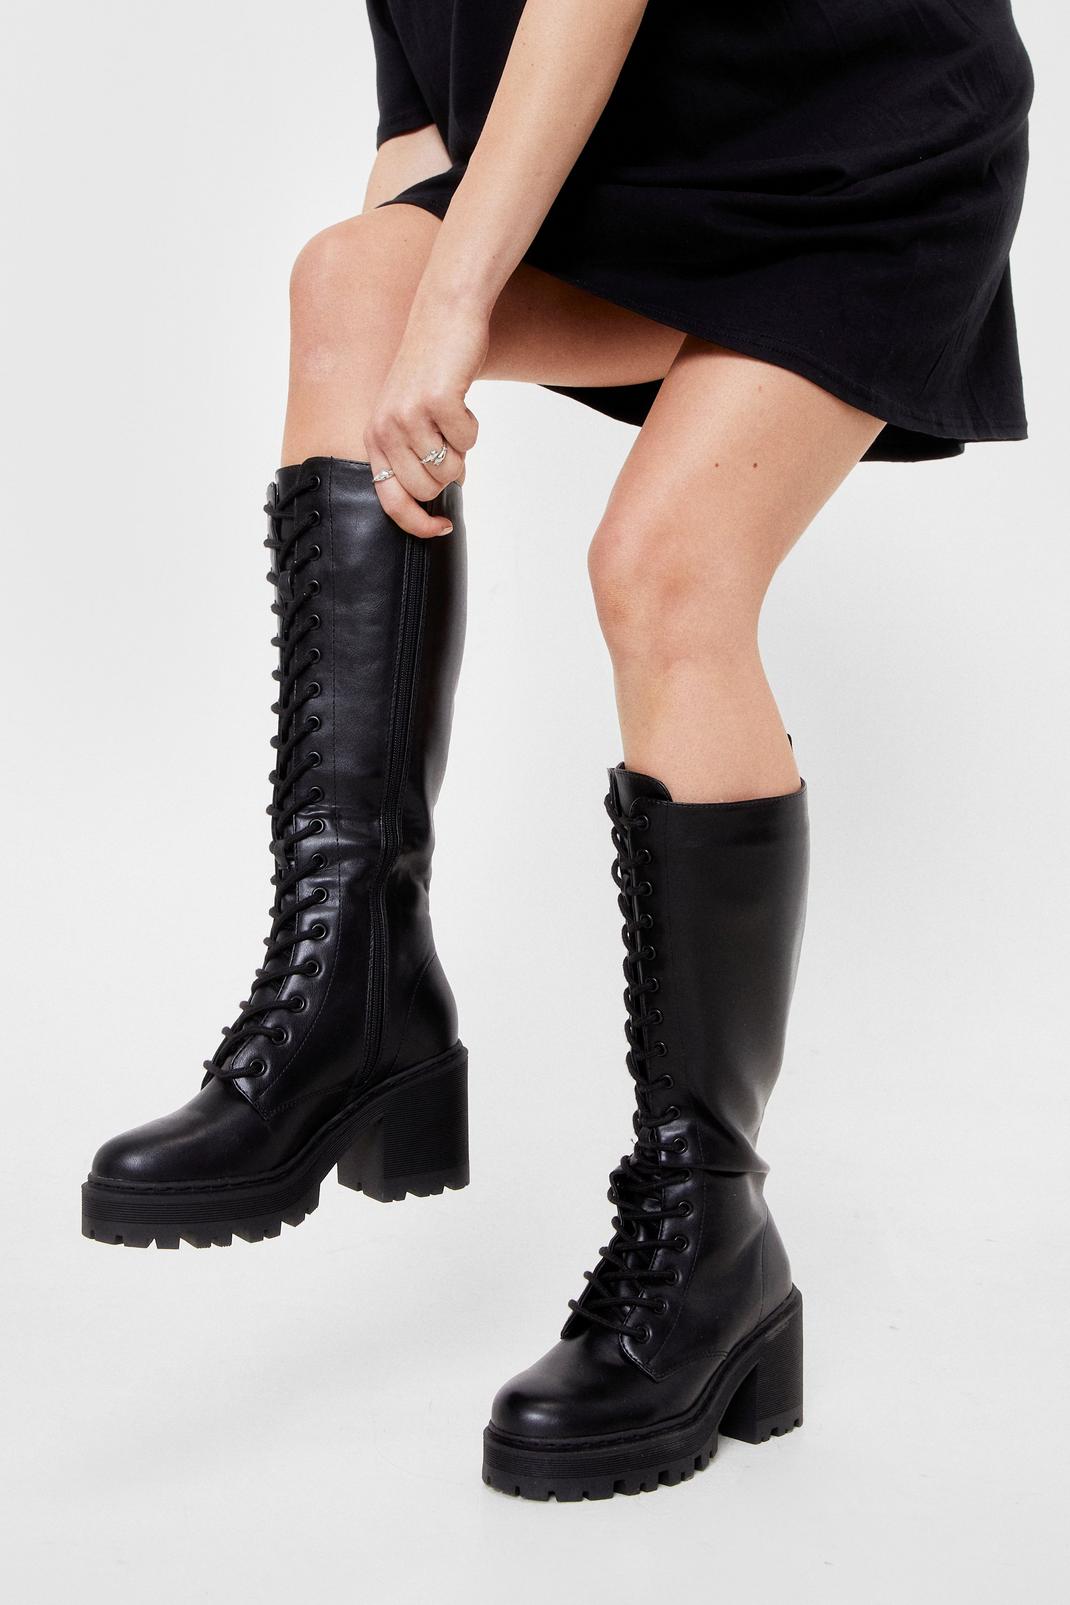 Reporter Turkey bearing Lace Up Knee High Chunky Boots | Nasty Gal